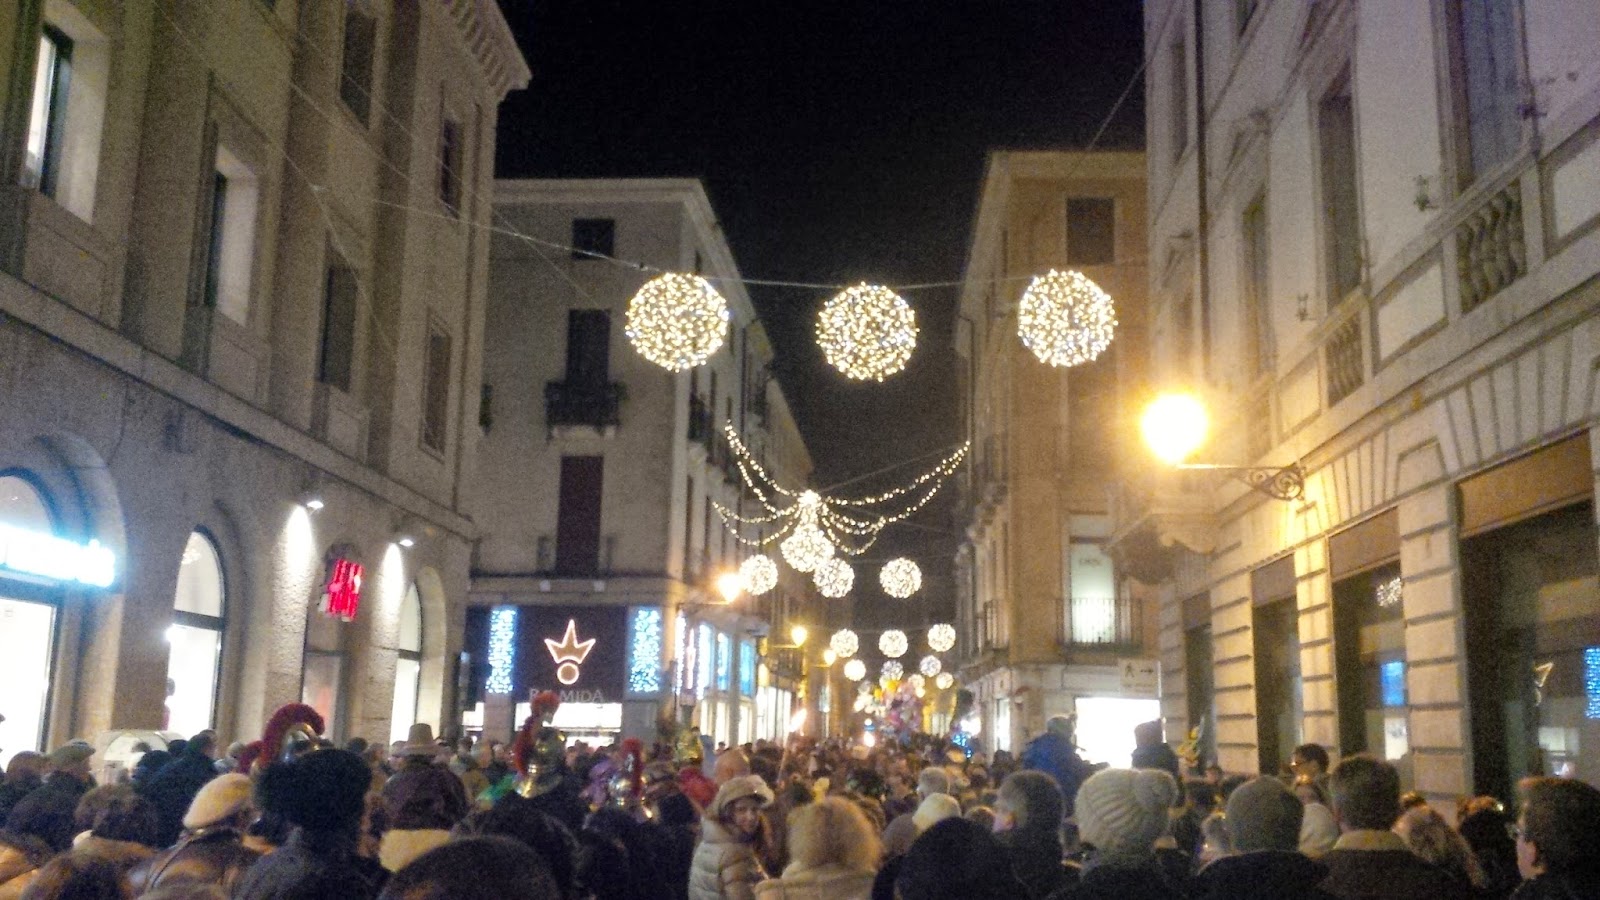 The procession following the living Nativity Scene in Vicenza 